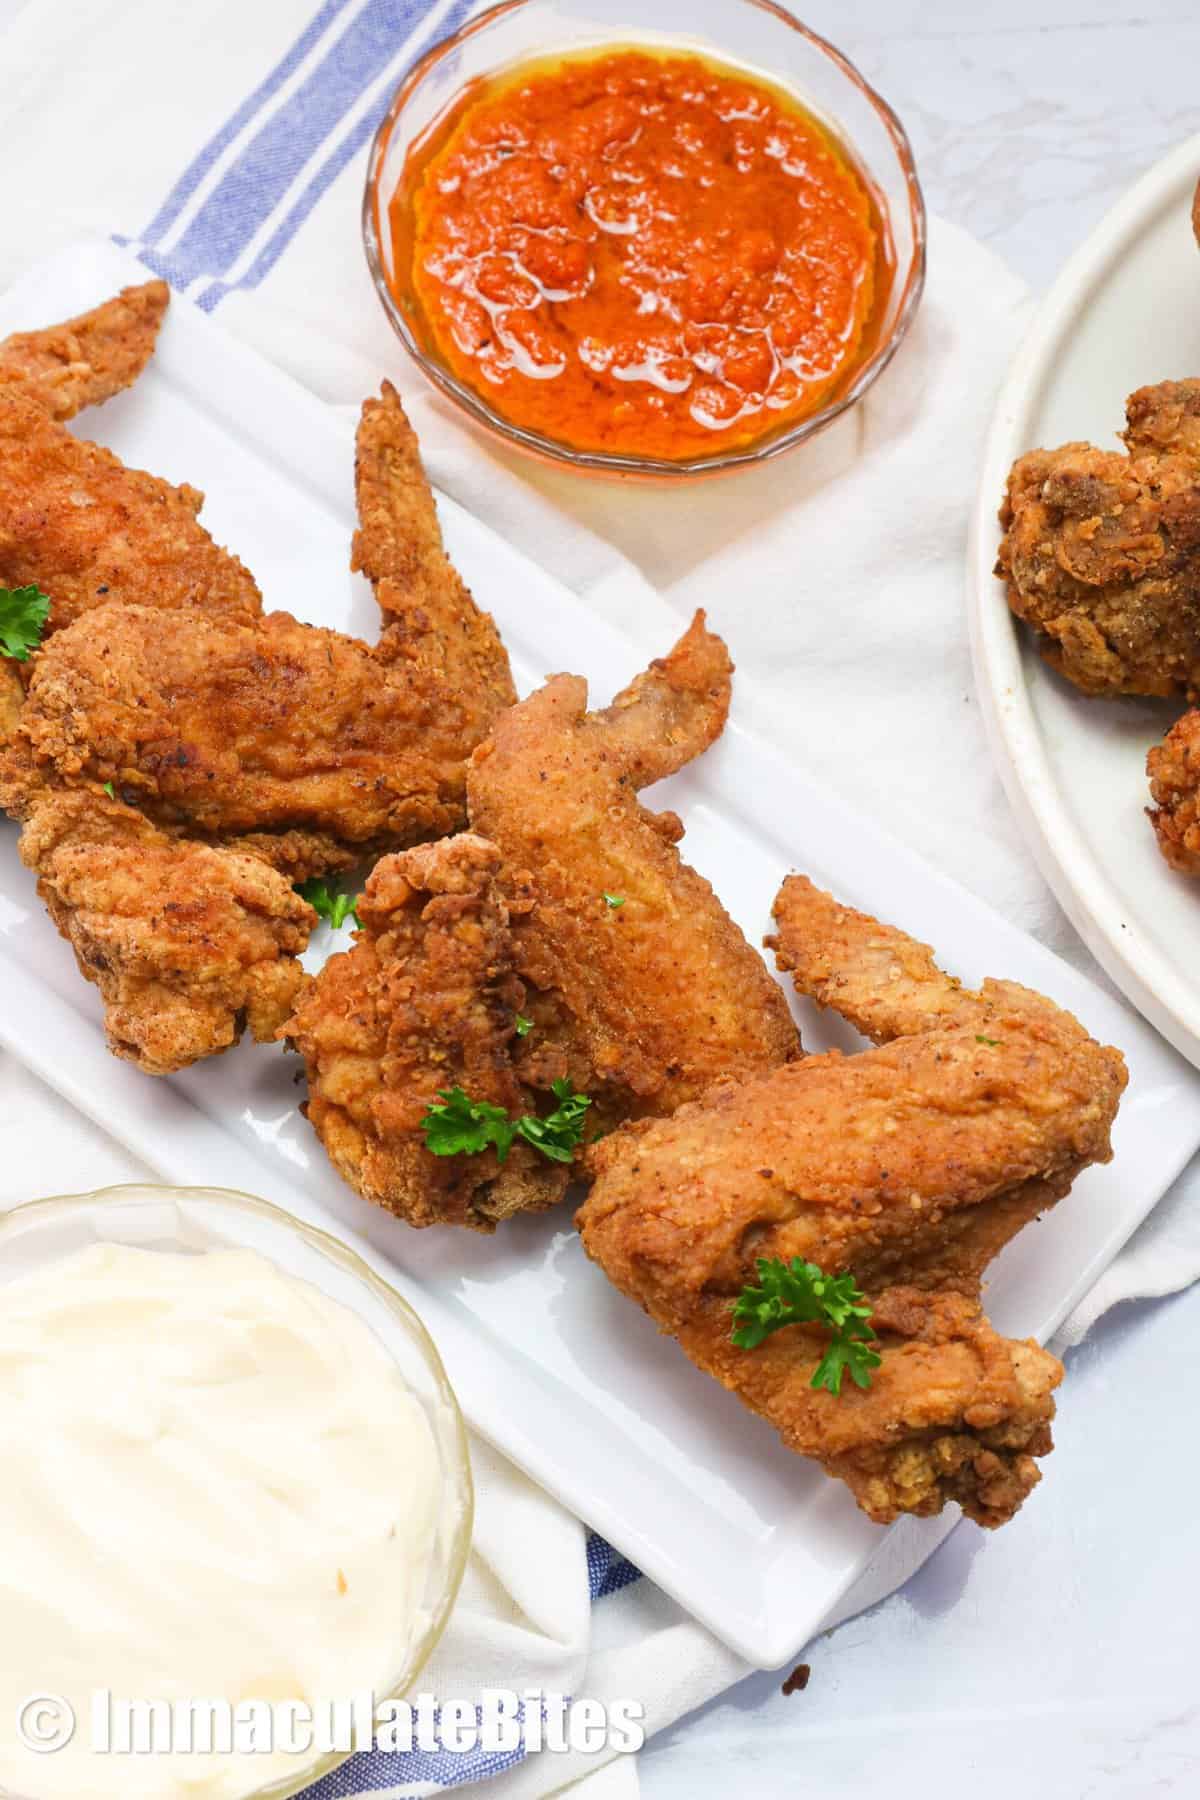 4 fried chicken wings on a white rectangular plate with hot sauce and remoulade on the side